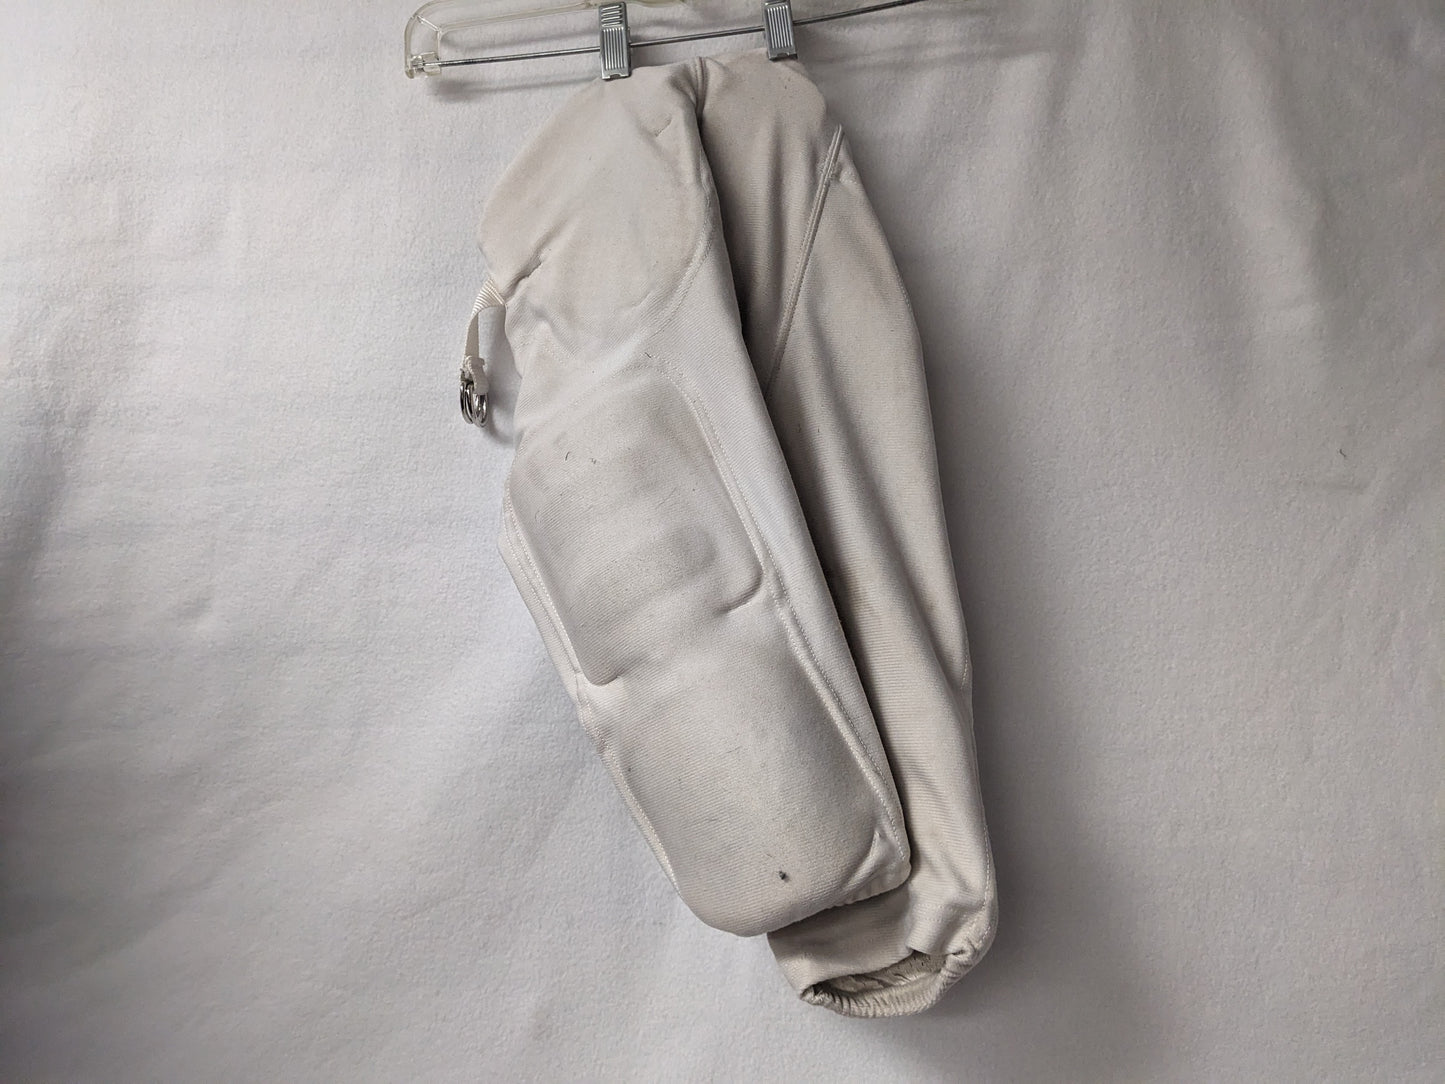 A4 Youth Football Pants Size Youth XS Color White Condition Used